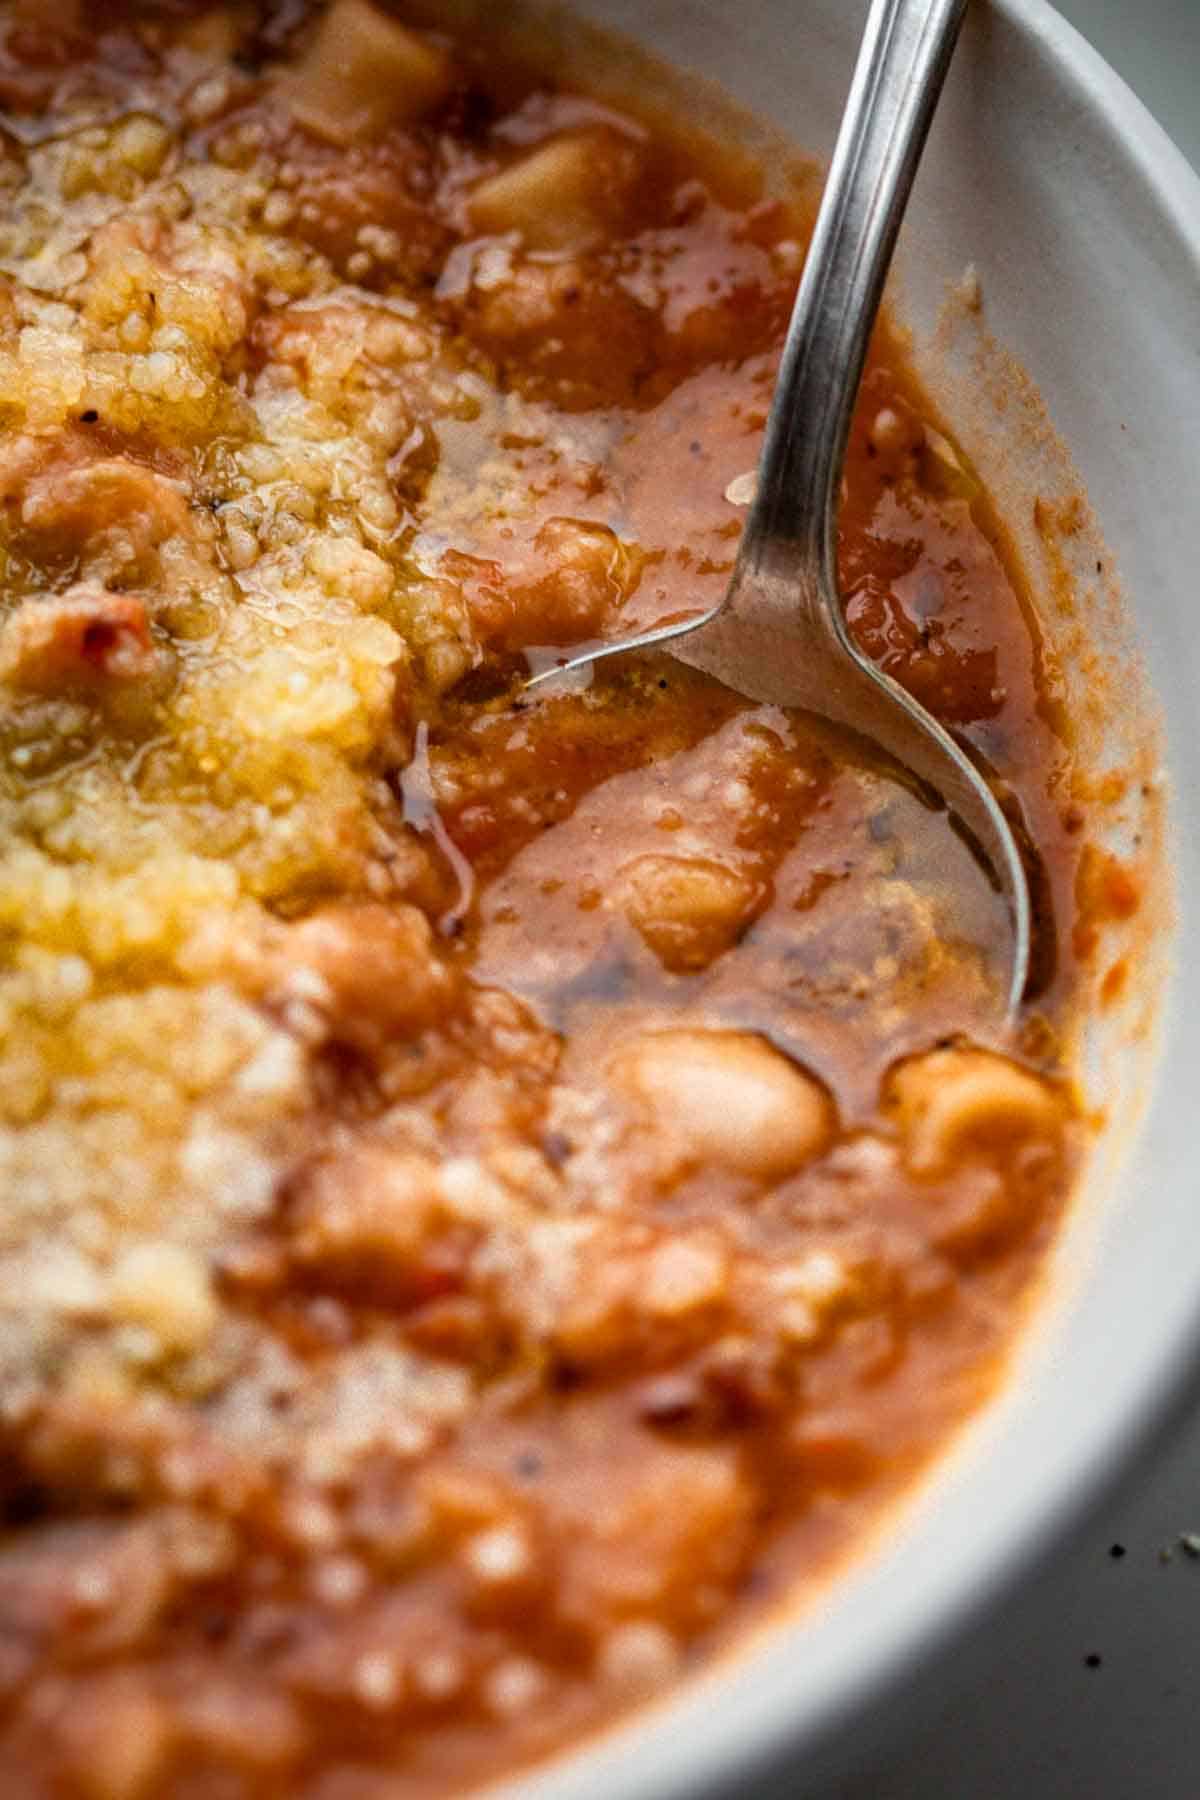 Close up of a spoon scooping up a spoonful of pasta e fagioli.